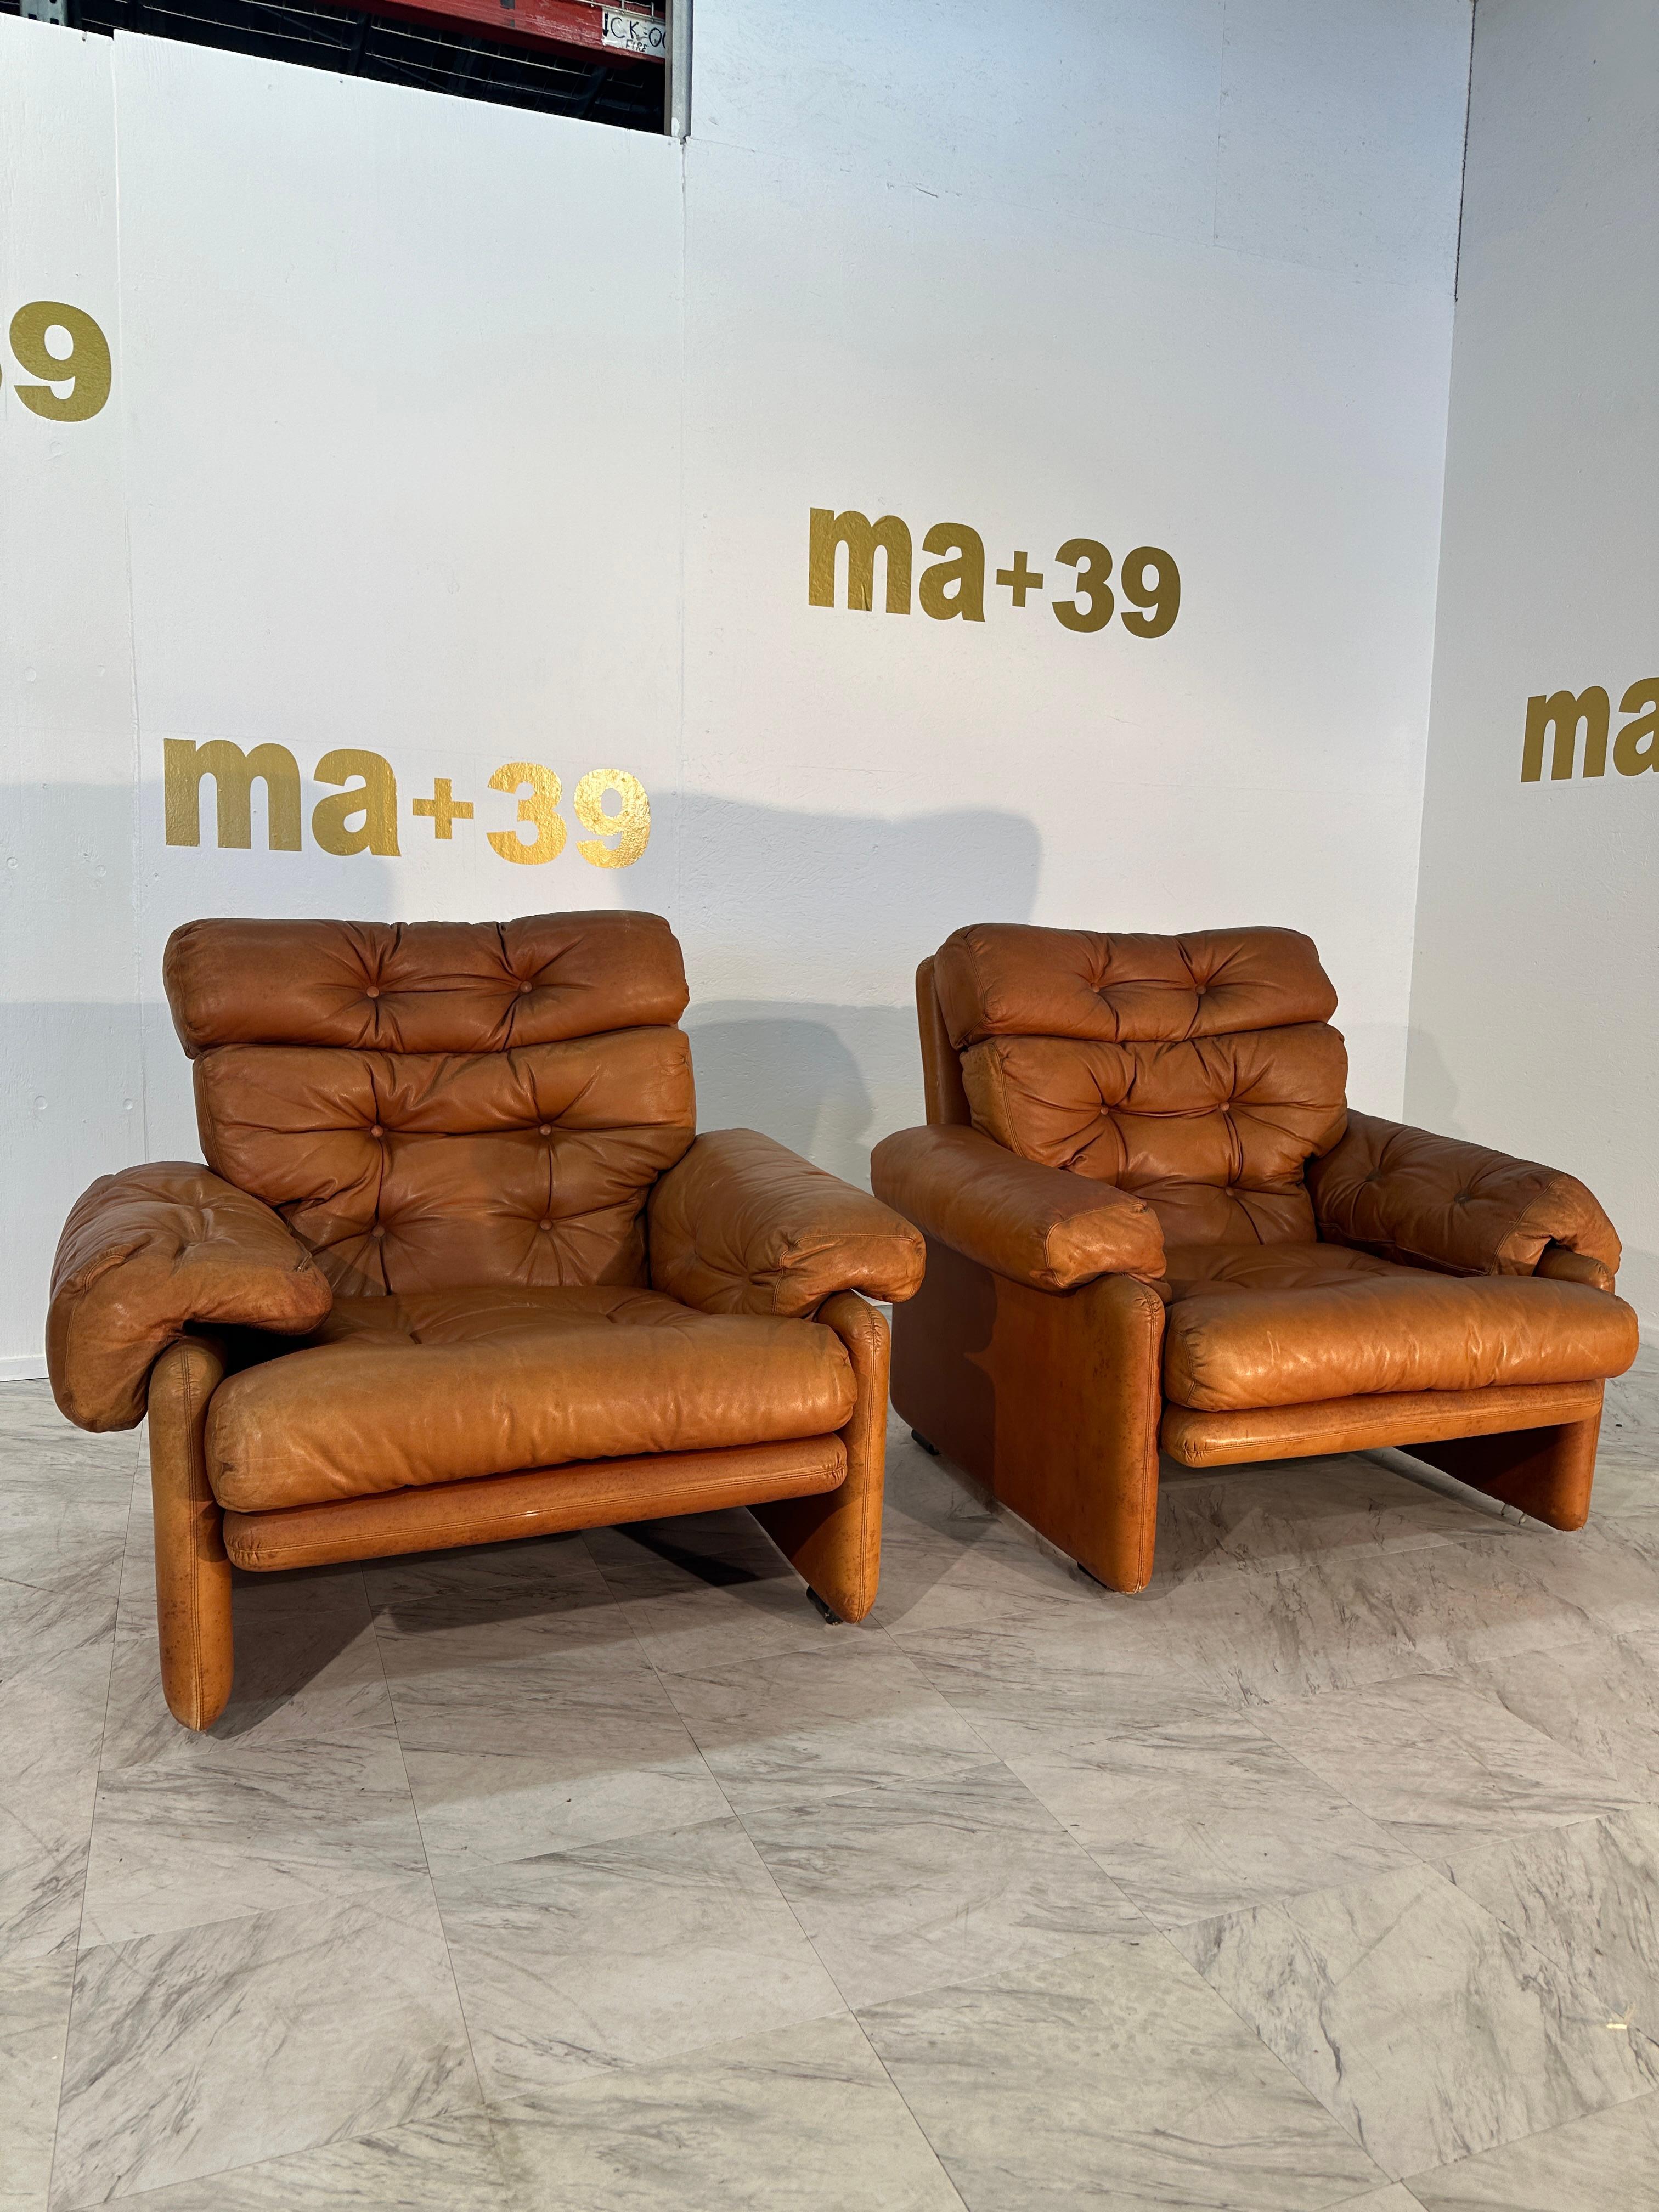 The Pair of 2 Afra & Tobia Scarpa Coronado Chairs for C&B Italia from the 1960s are iconic examples of mid-century modern design. These chairs are upholstered in fully brown leather, providing a luxurious and timeless aesthetic. The Coronado Chairs